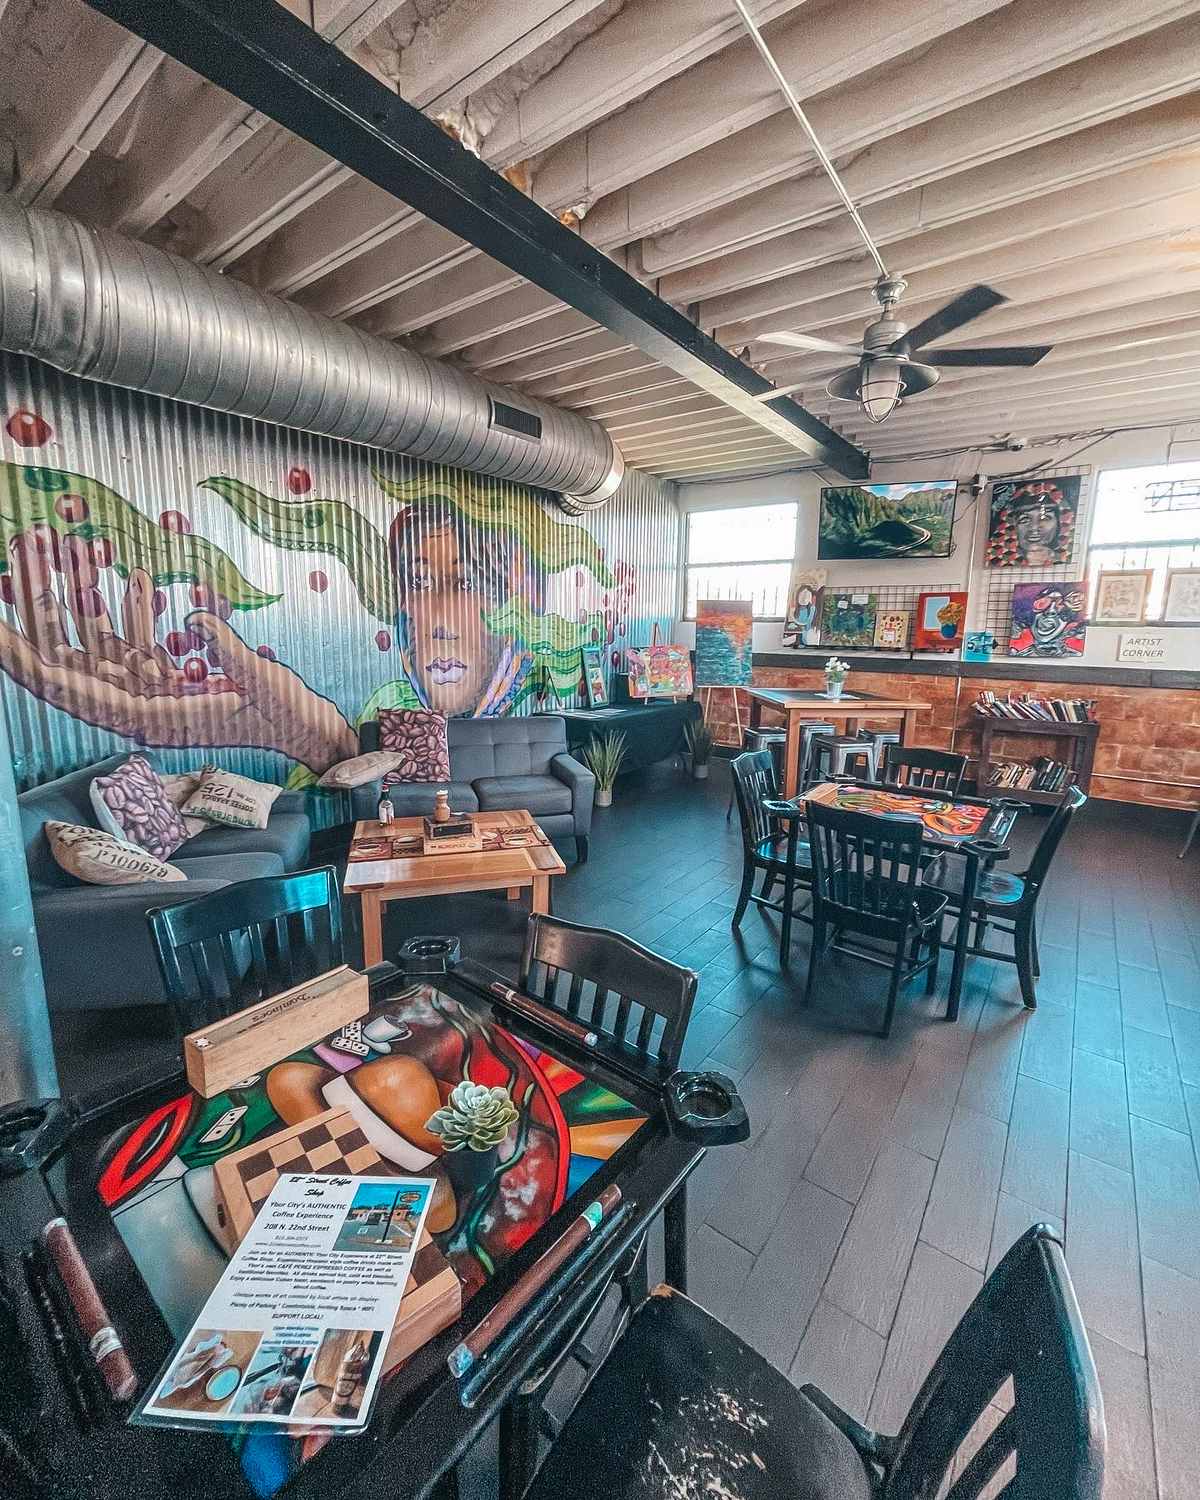 Seating area of 22nd Street Coffee Shop in Ybor Tampa